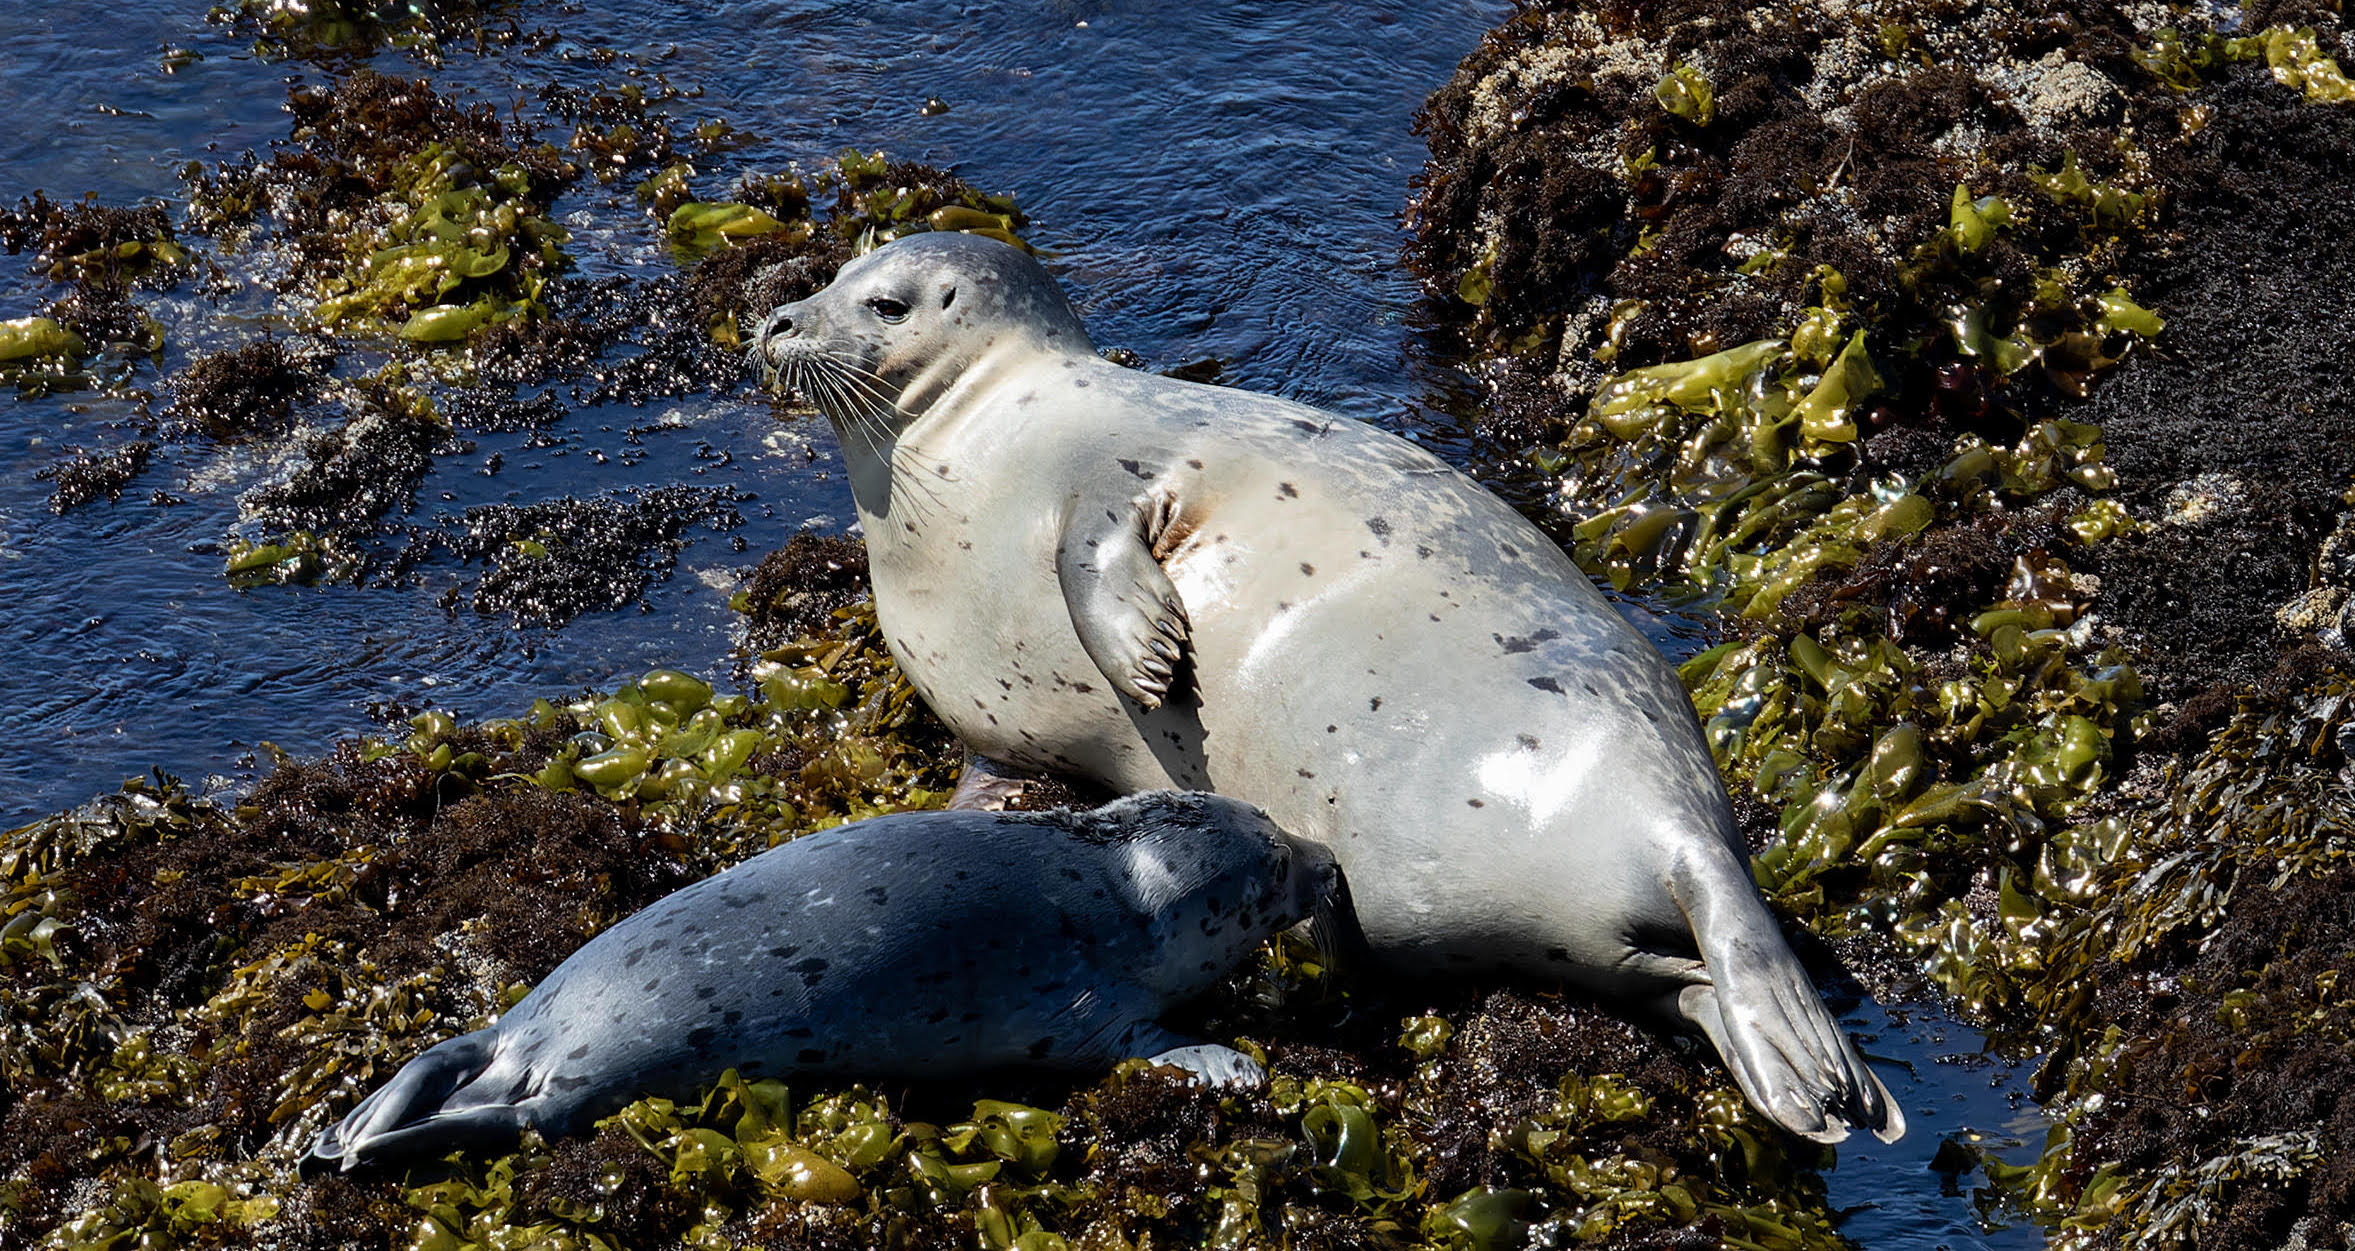 Stranded seals and whales tell us about disease and marine issues